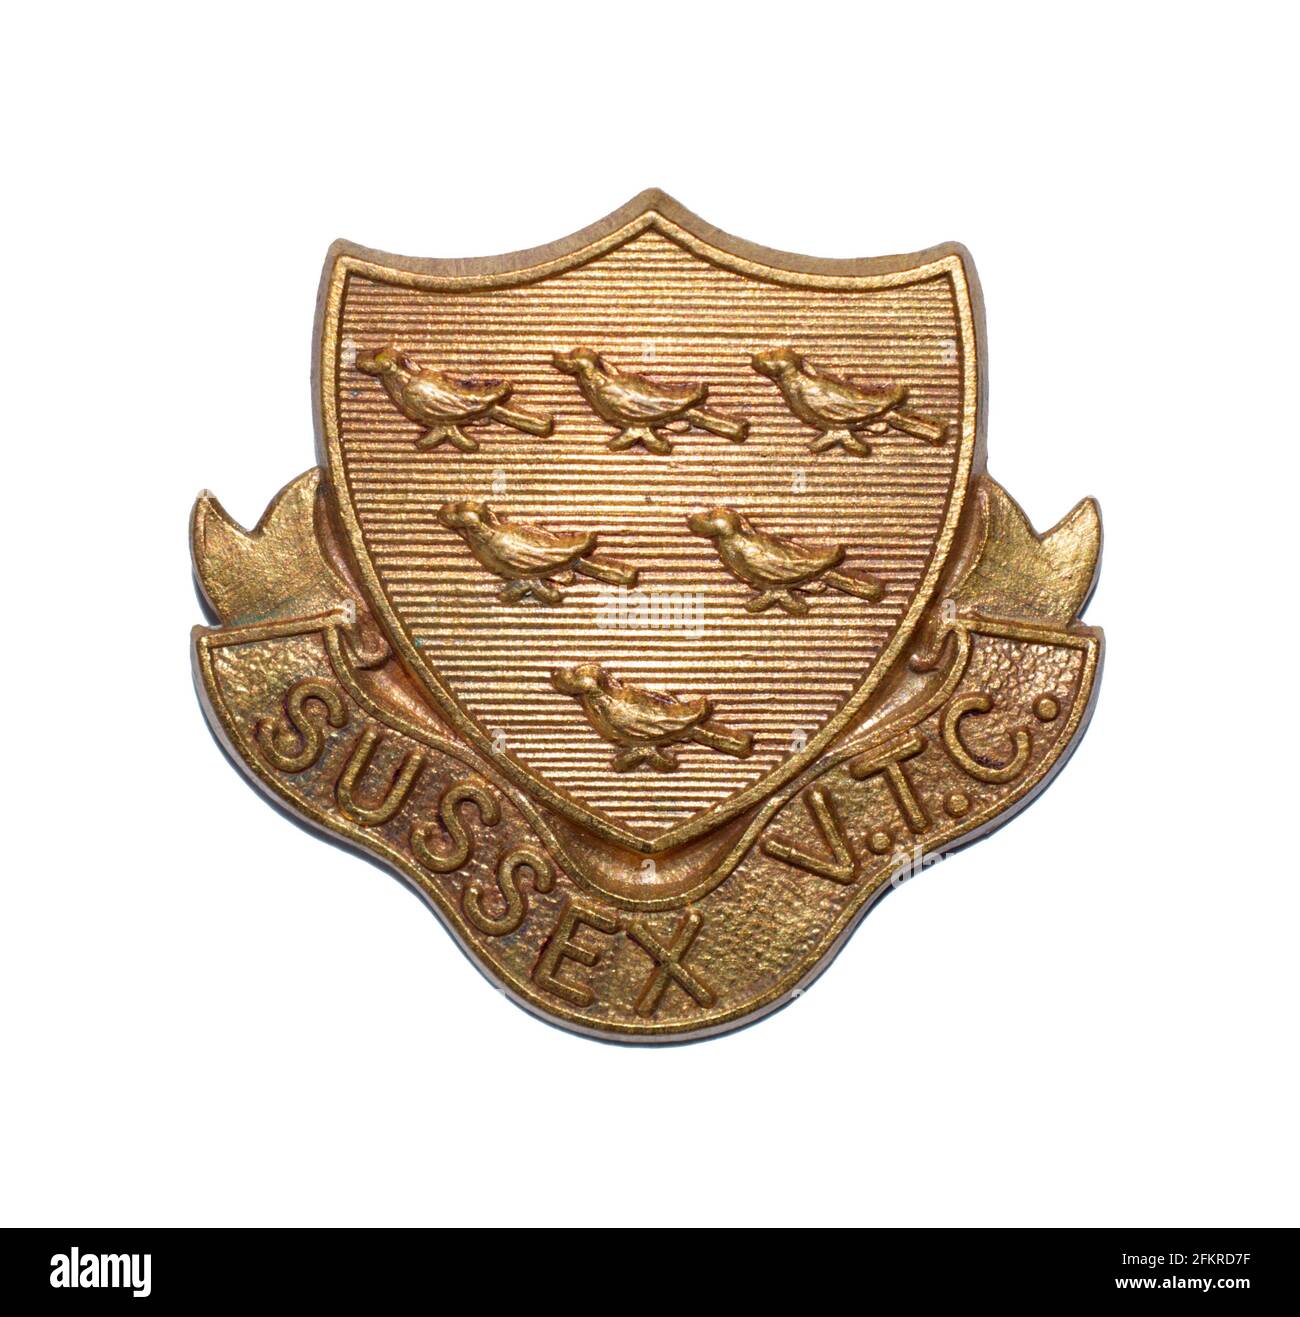 A cap badge of the Sussex Volunteer Training Corps, a First Work War British home defence unit. The crest shows six martlets, the emblem of Sussex. Stock Photo